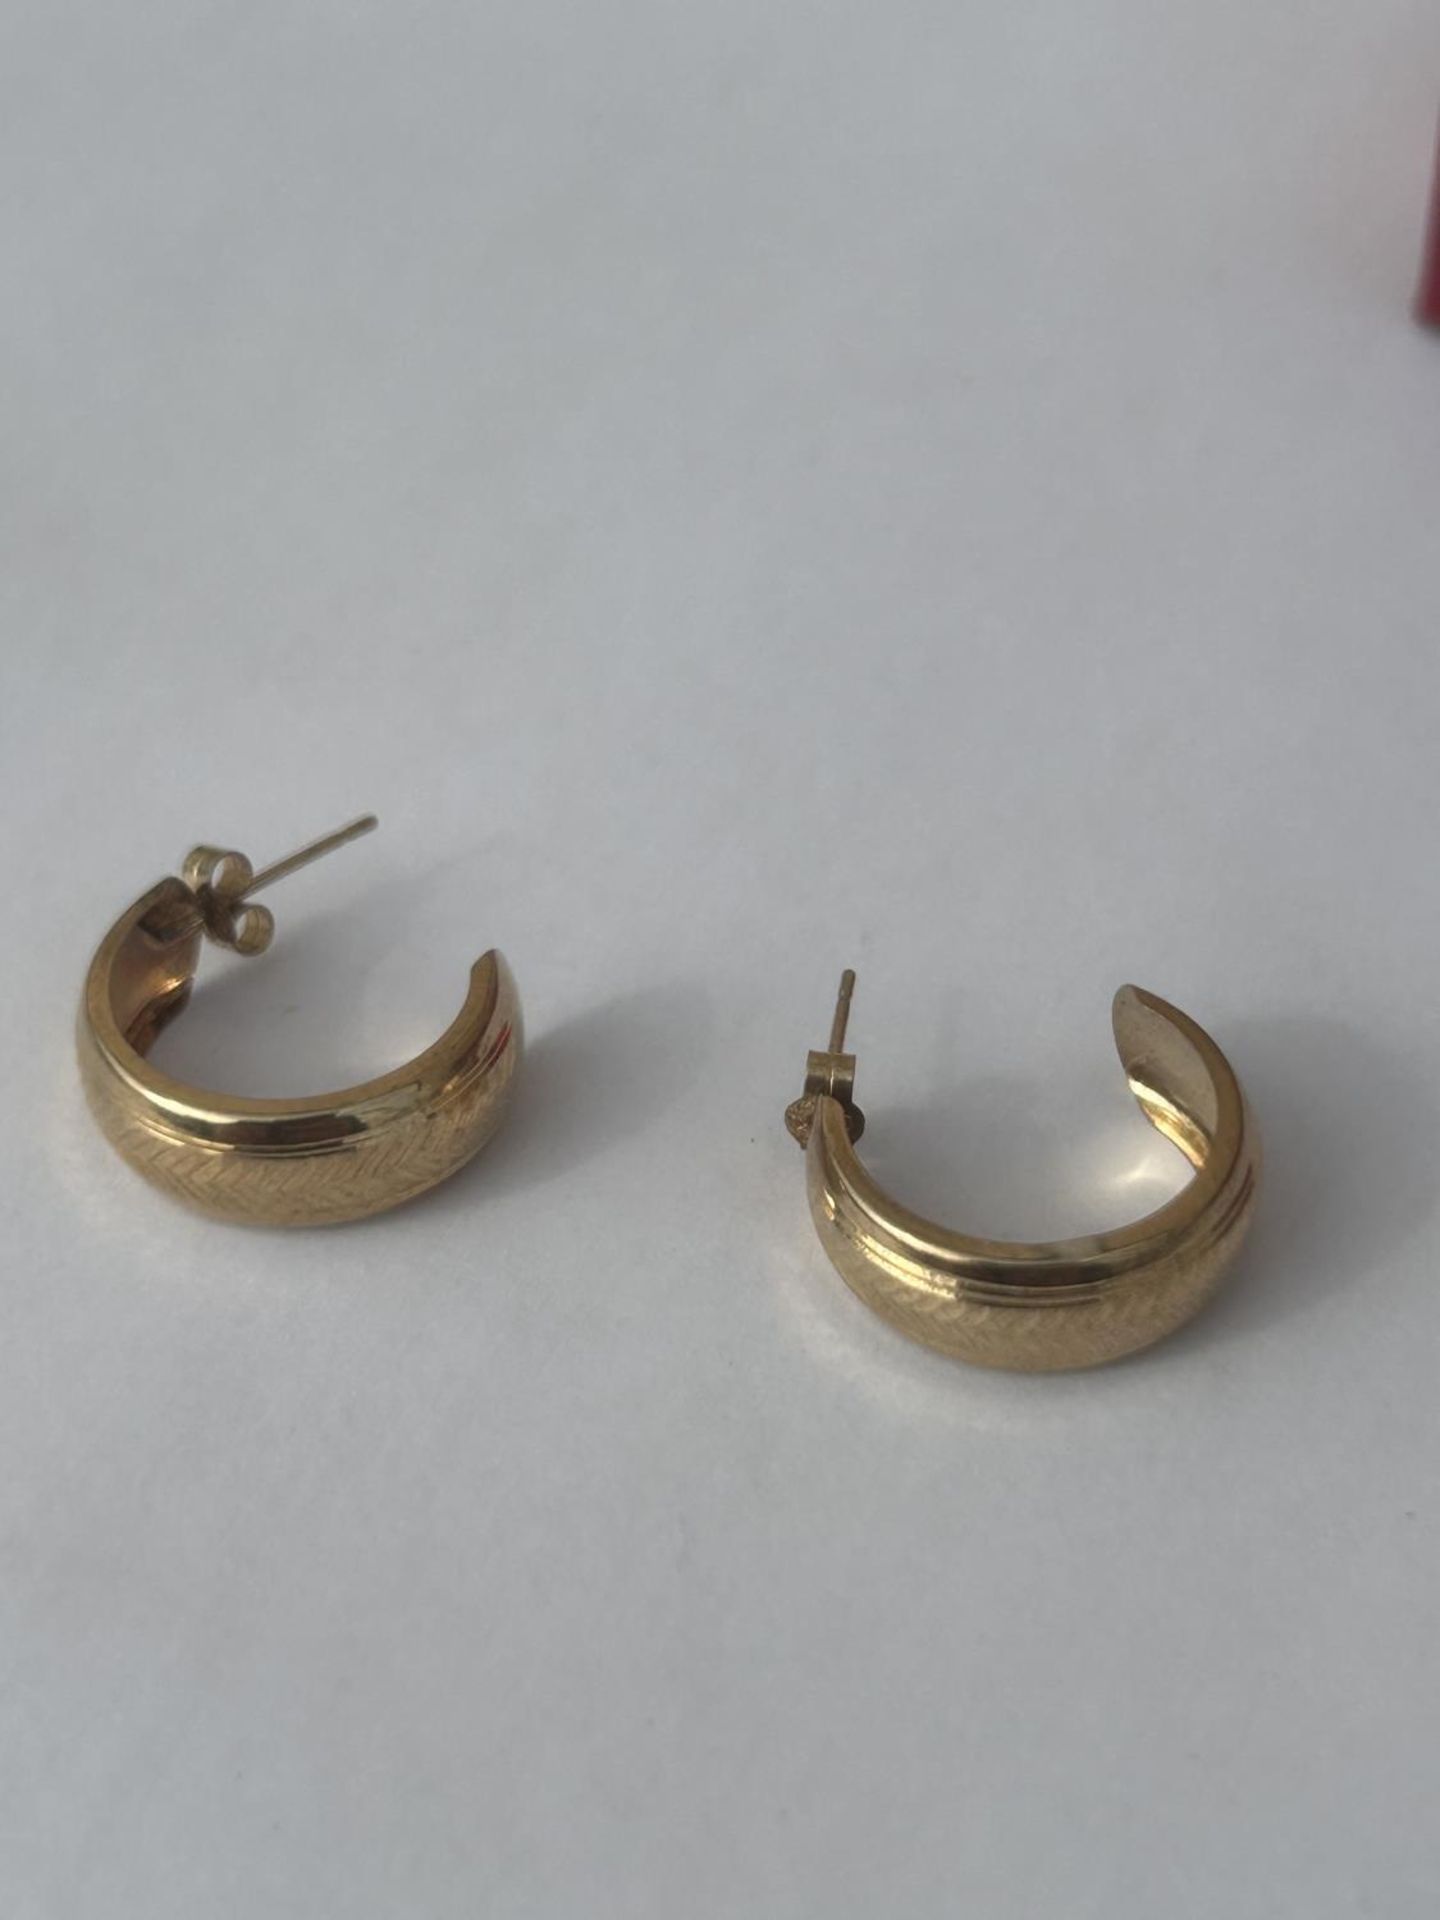 A PAIR OF 9CT GOLD HALF MOON EARRINGS COMPLETE WITH GOLD BUTTERFLY BACKS AND PRESENTATION BOX, - Image 3 of 3